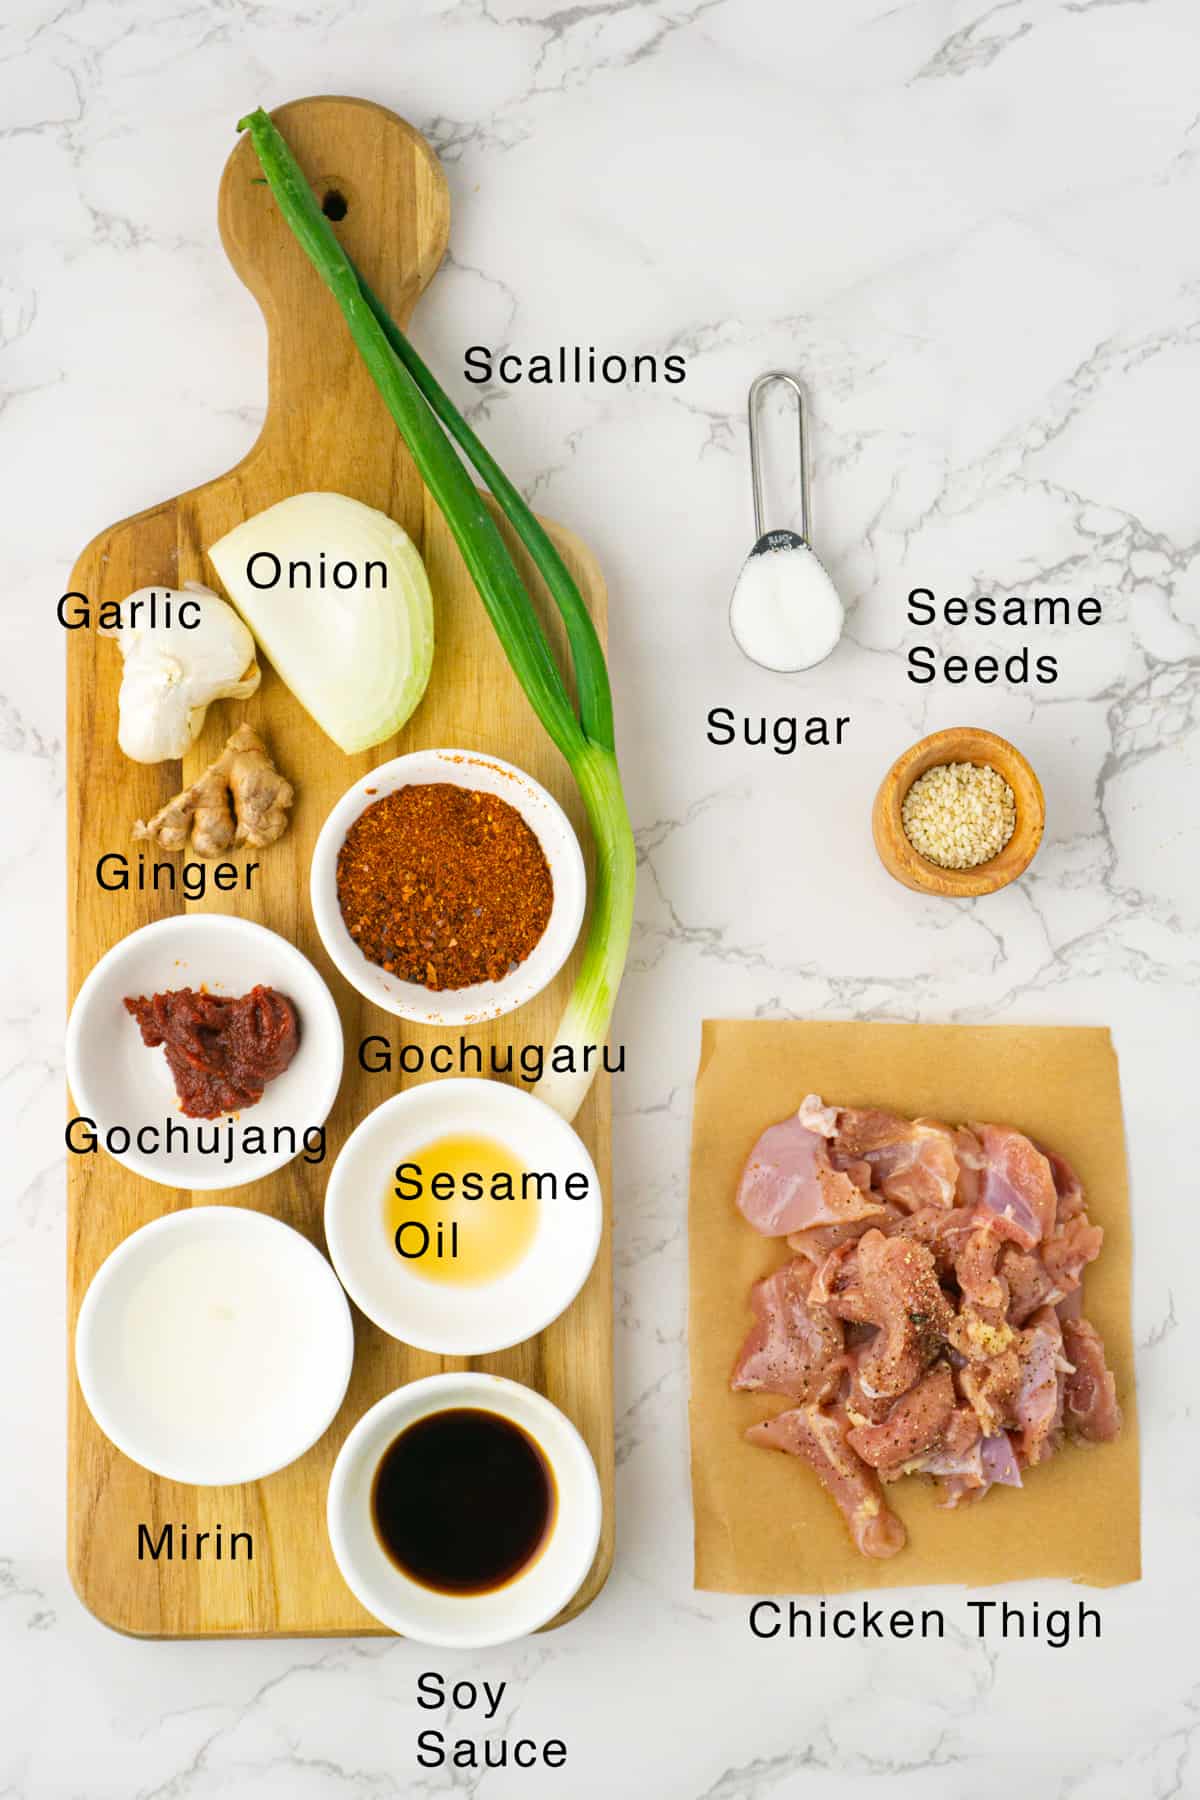 Ingredients for the spicy chicken bulgogi laid out on the table.